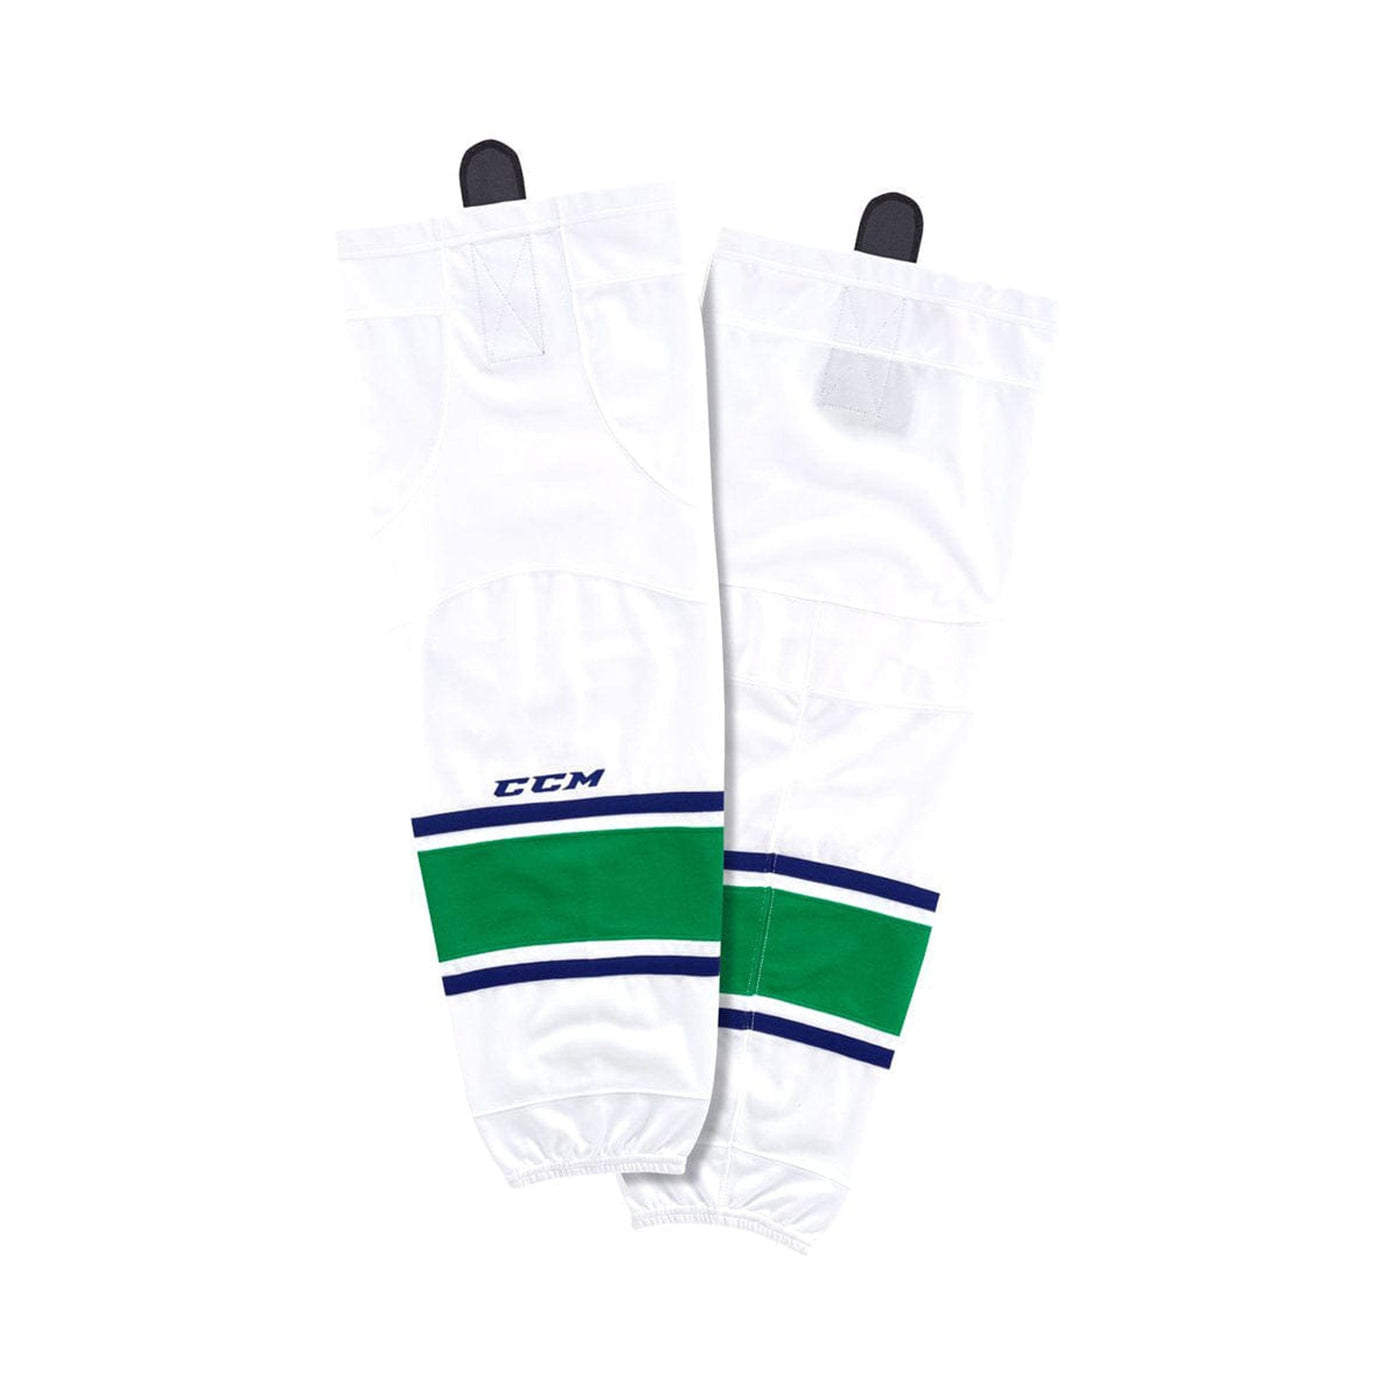 Vancouver Canucks Away CCM Quicklite 8000 Hockey Socks - The Hockey Shop Source For Sports